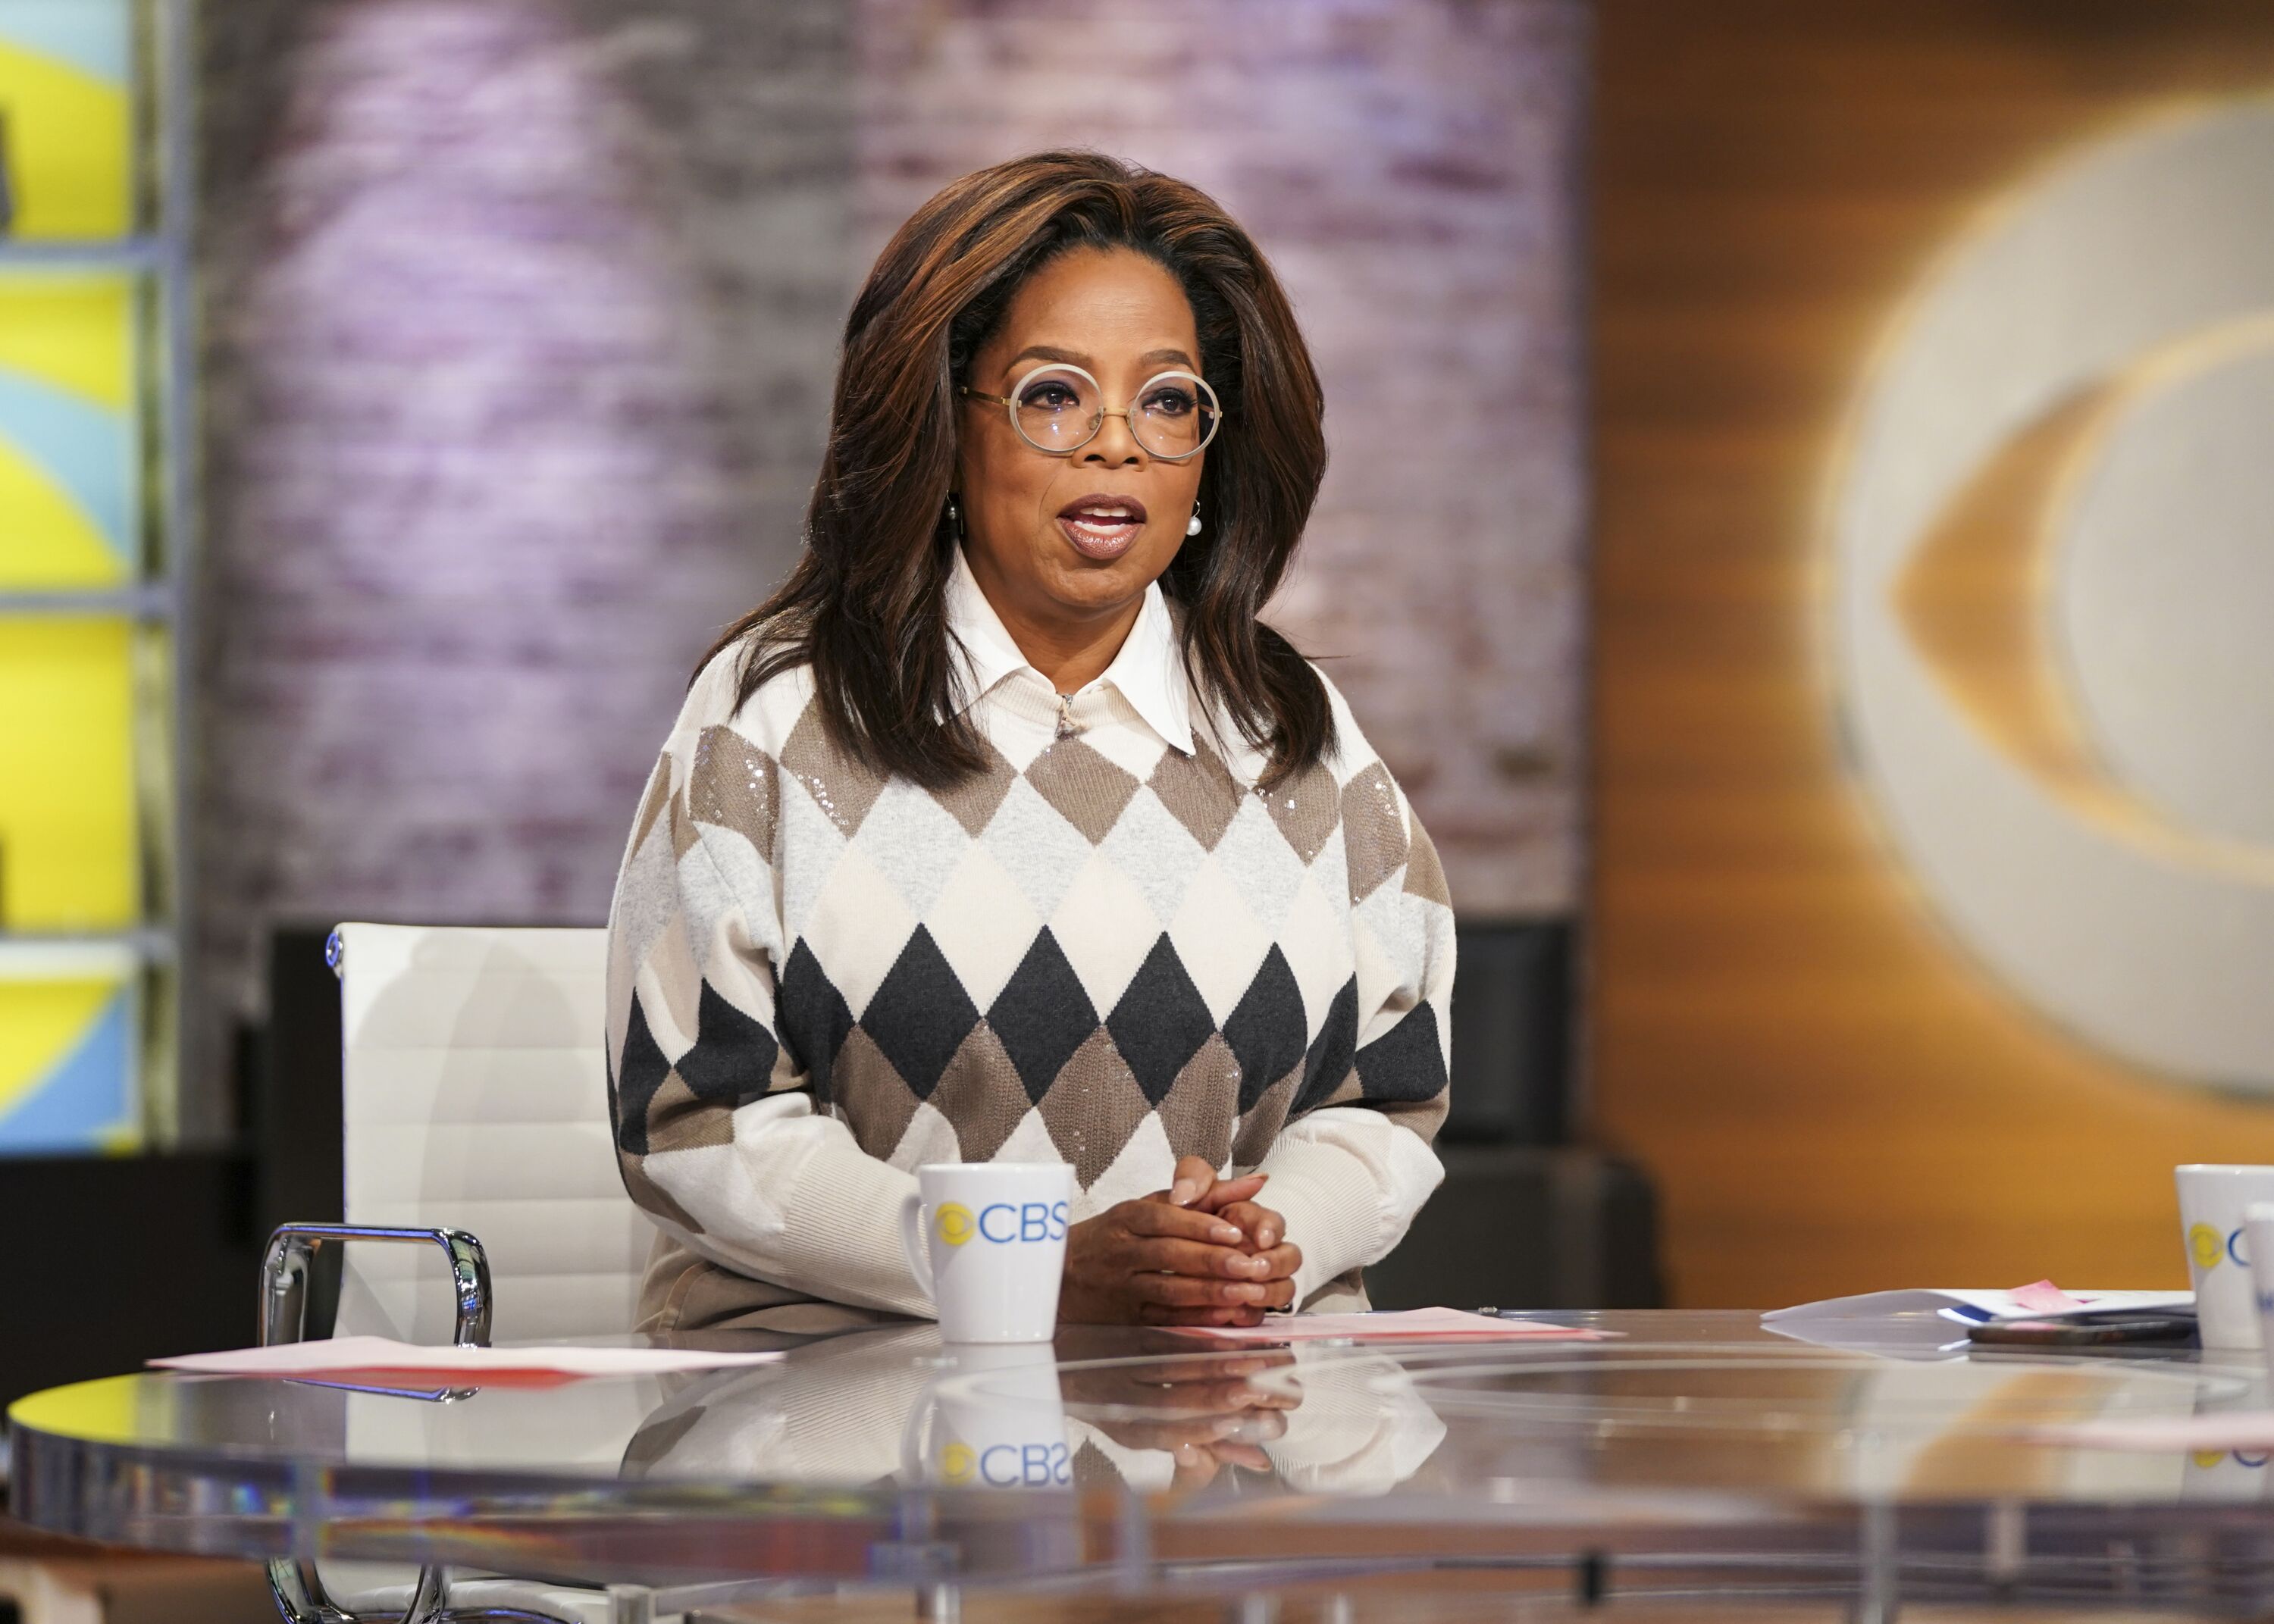 Oprah Winfrey at the CBS studios for a TV guesting | Source: Getty Images/GlobalImagesUkraine